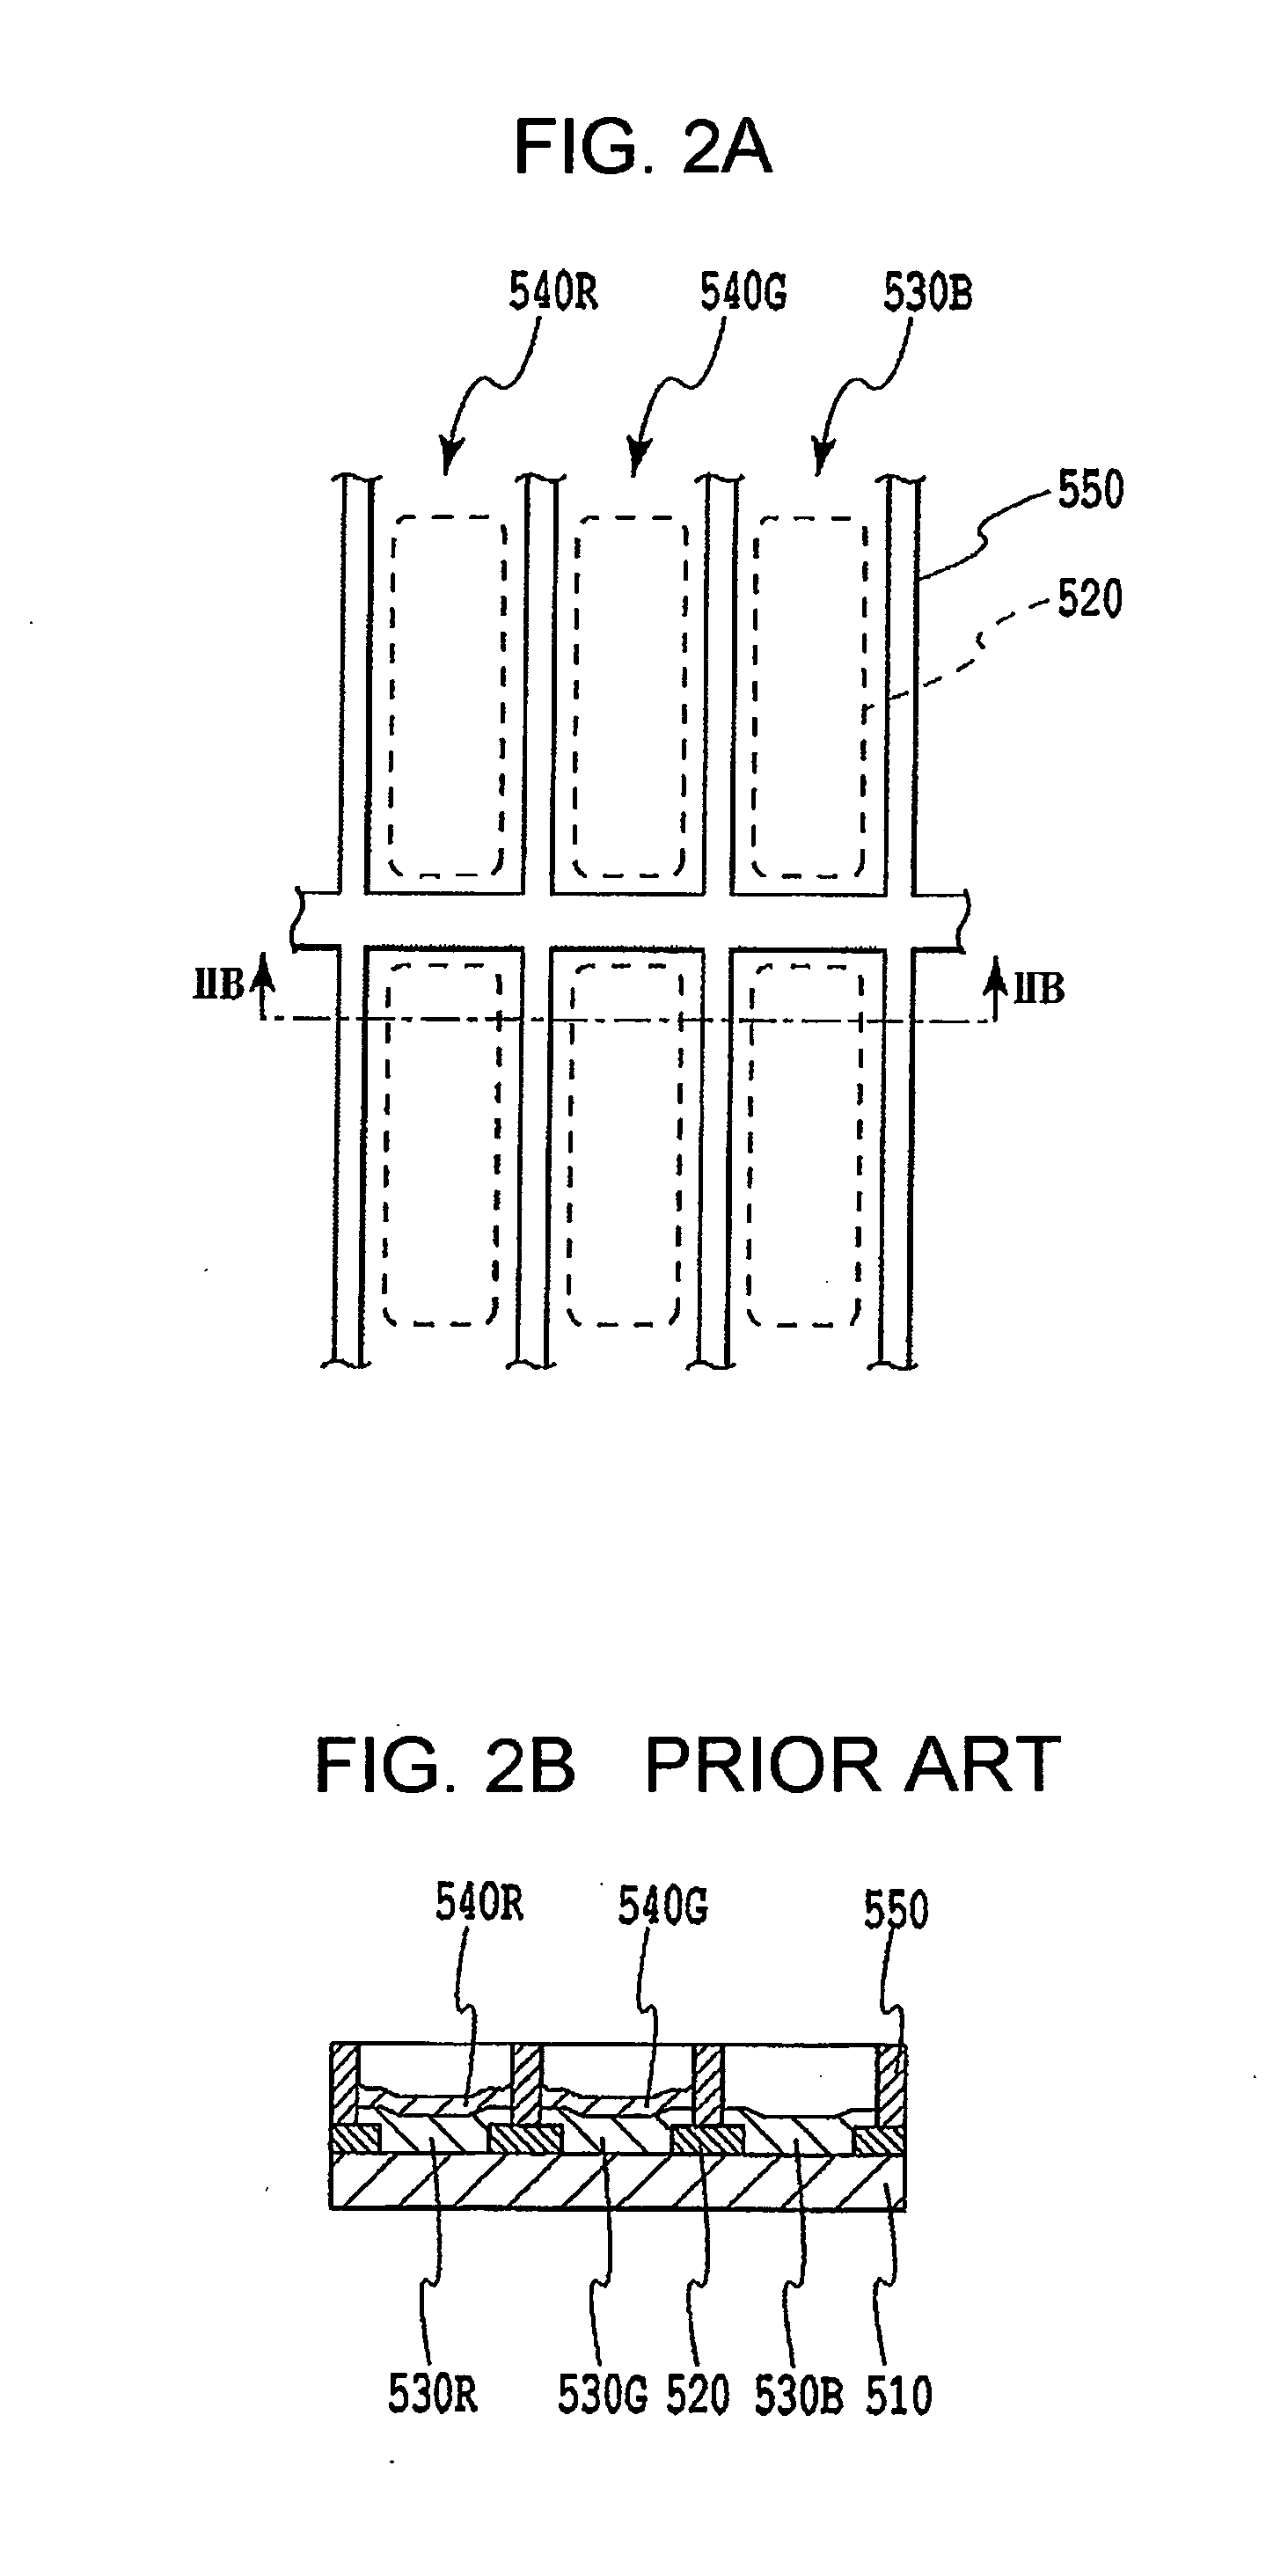 Flat panel display, intermediate manufactured product and method of manufacturing same